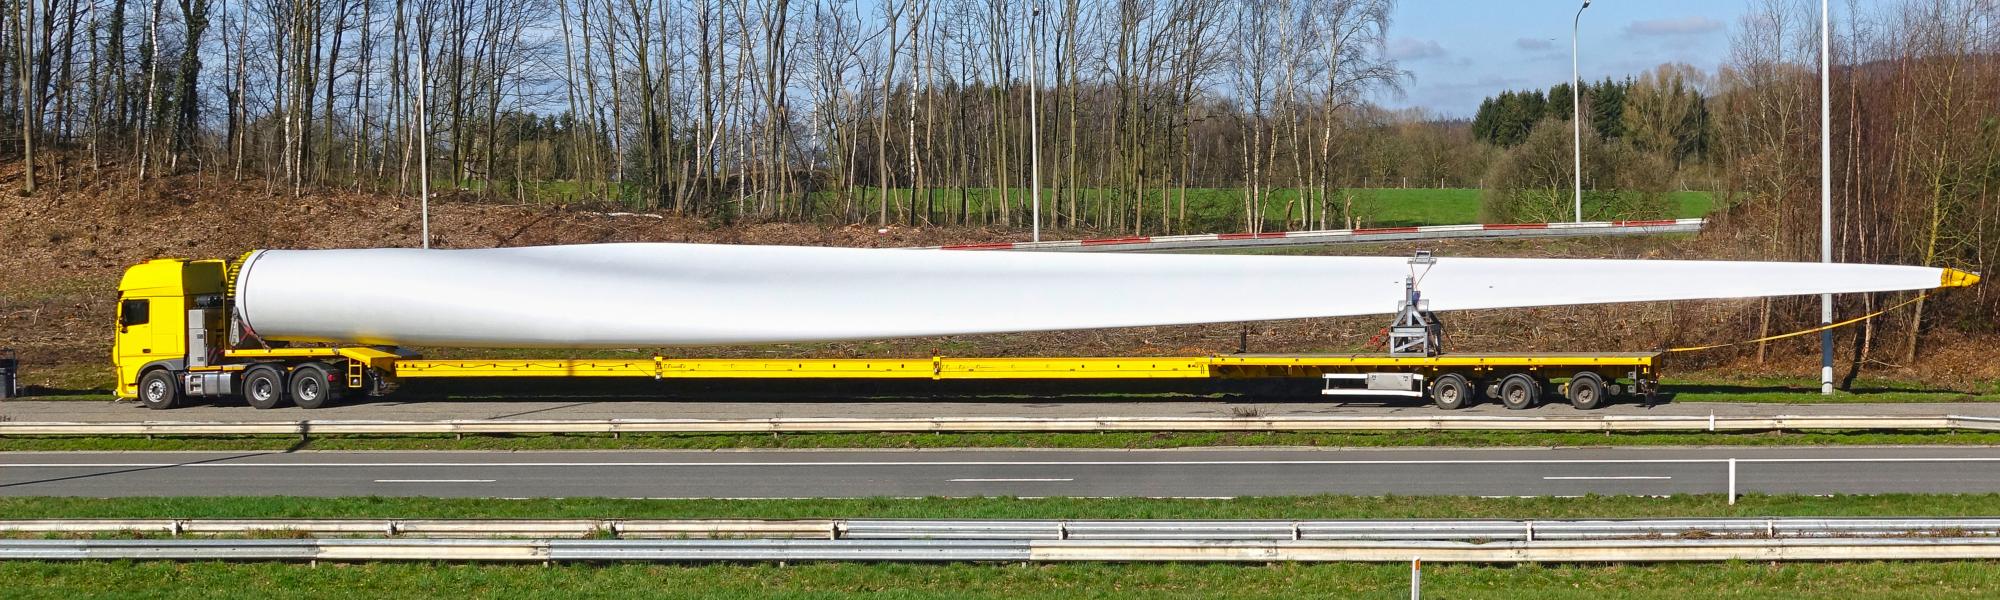 Truck transporting rotor blade fro wind power plant